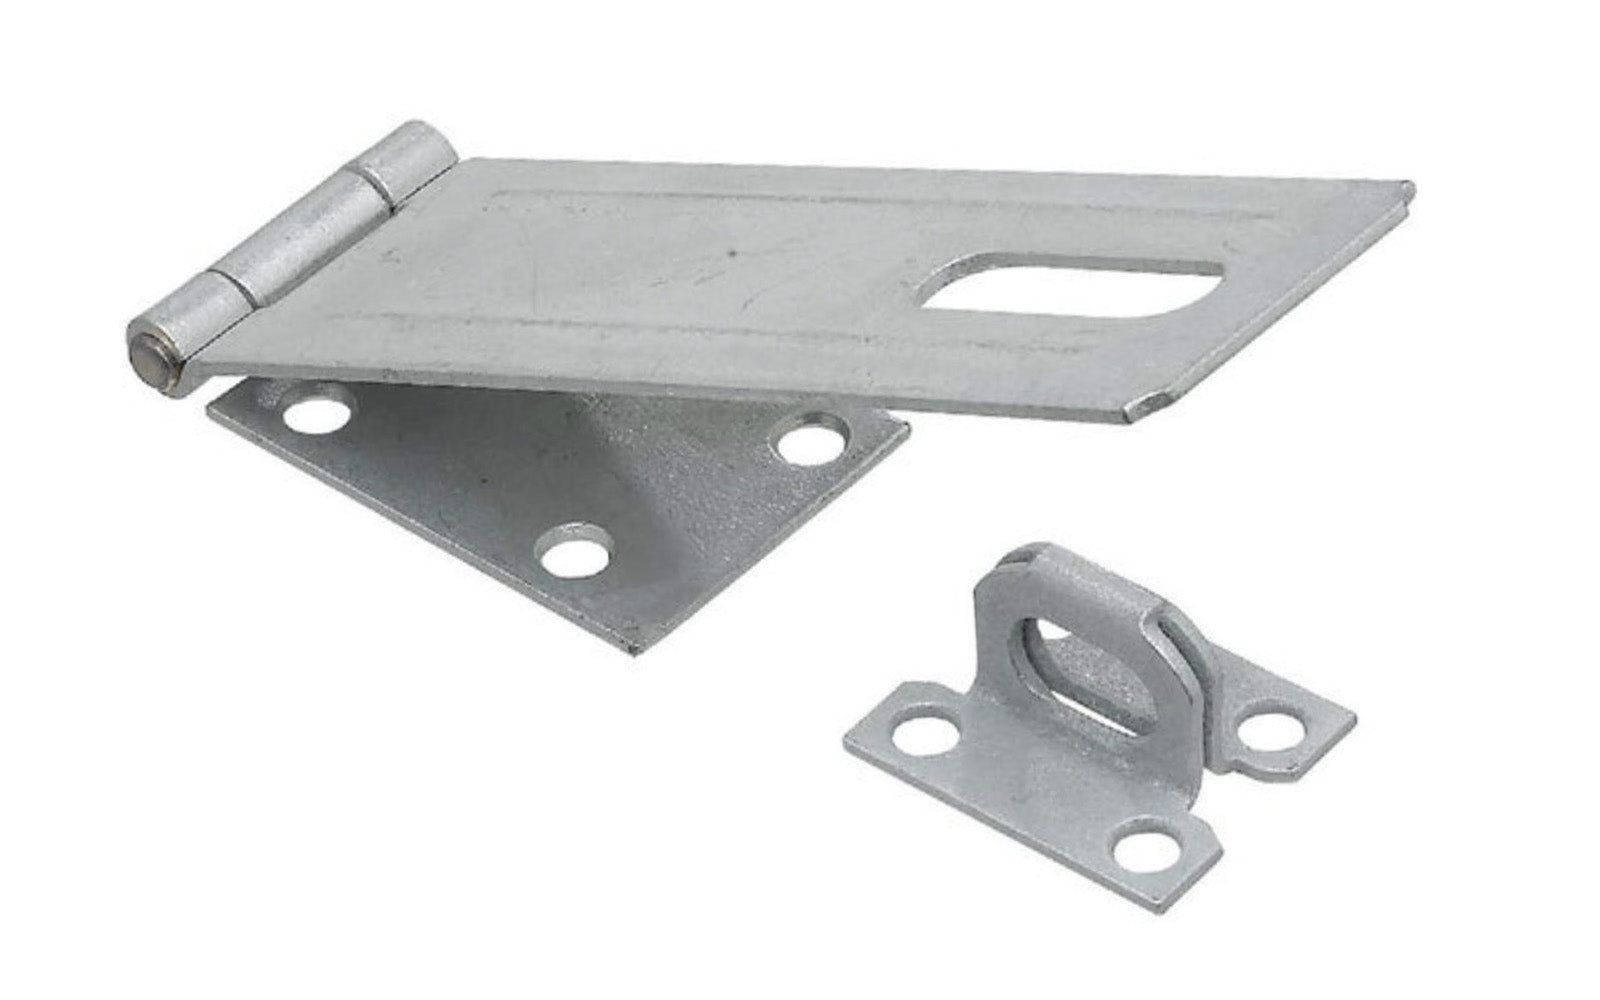 6" galvanized coated steel safety hasp is designed to secure a wide variety of cabinets, small doors, boxes, trunks. Includes a rigid, non-swivel staple. For security, all screws are concealed when hasp is closed. Manufactured from hot rolled steel for durability.  National Hardware Model N102-780. 038613102781. 